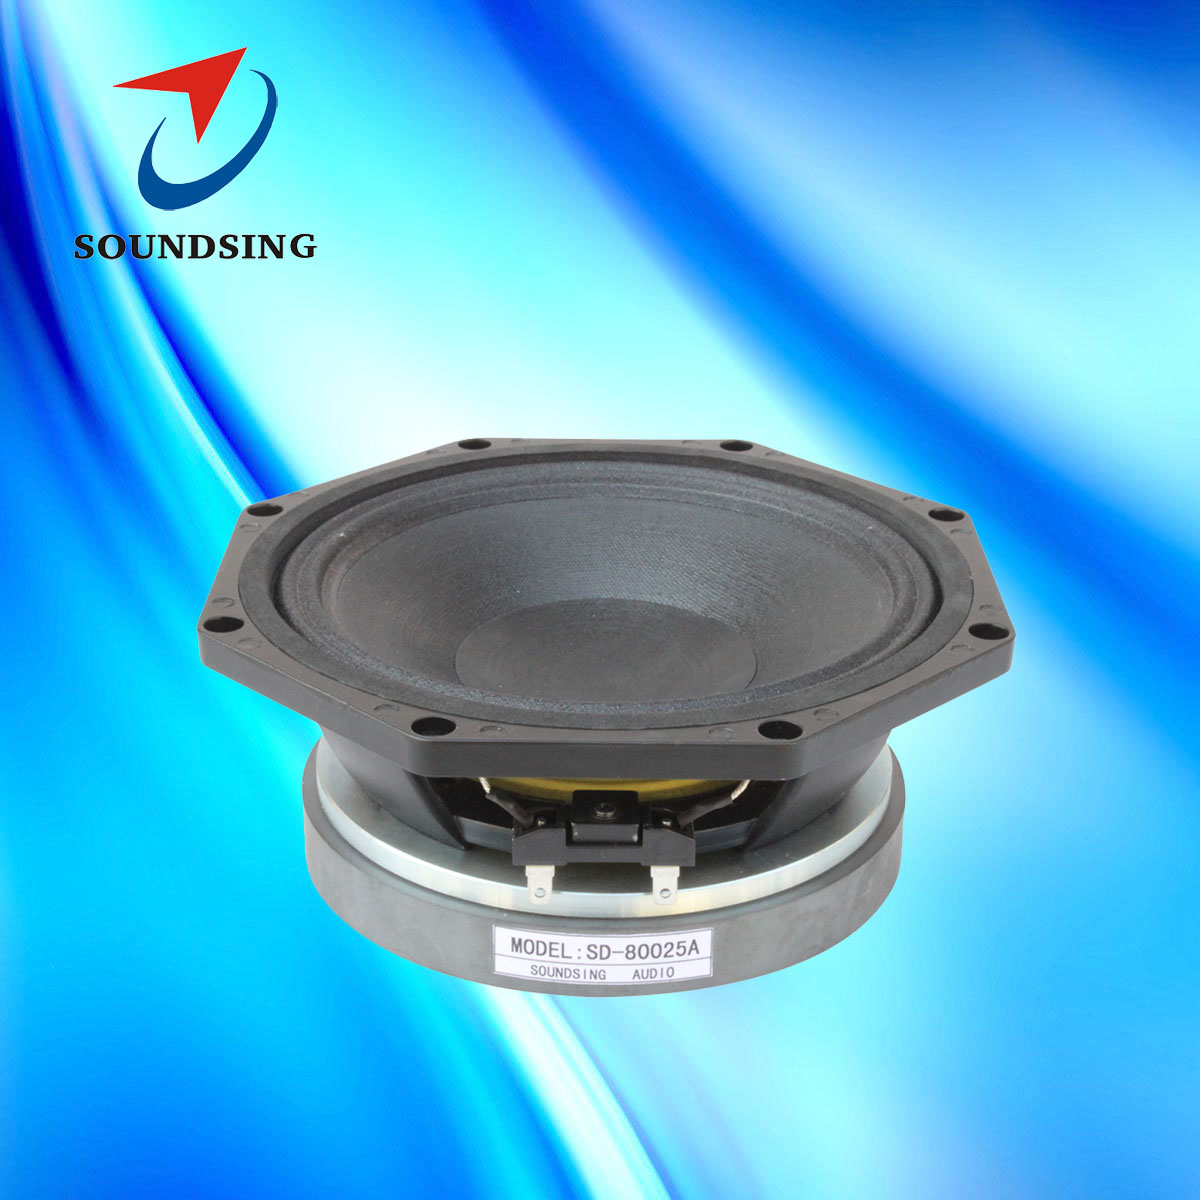 SD-80025A 8"high power pro audio speakers